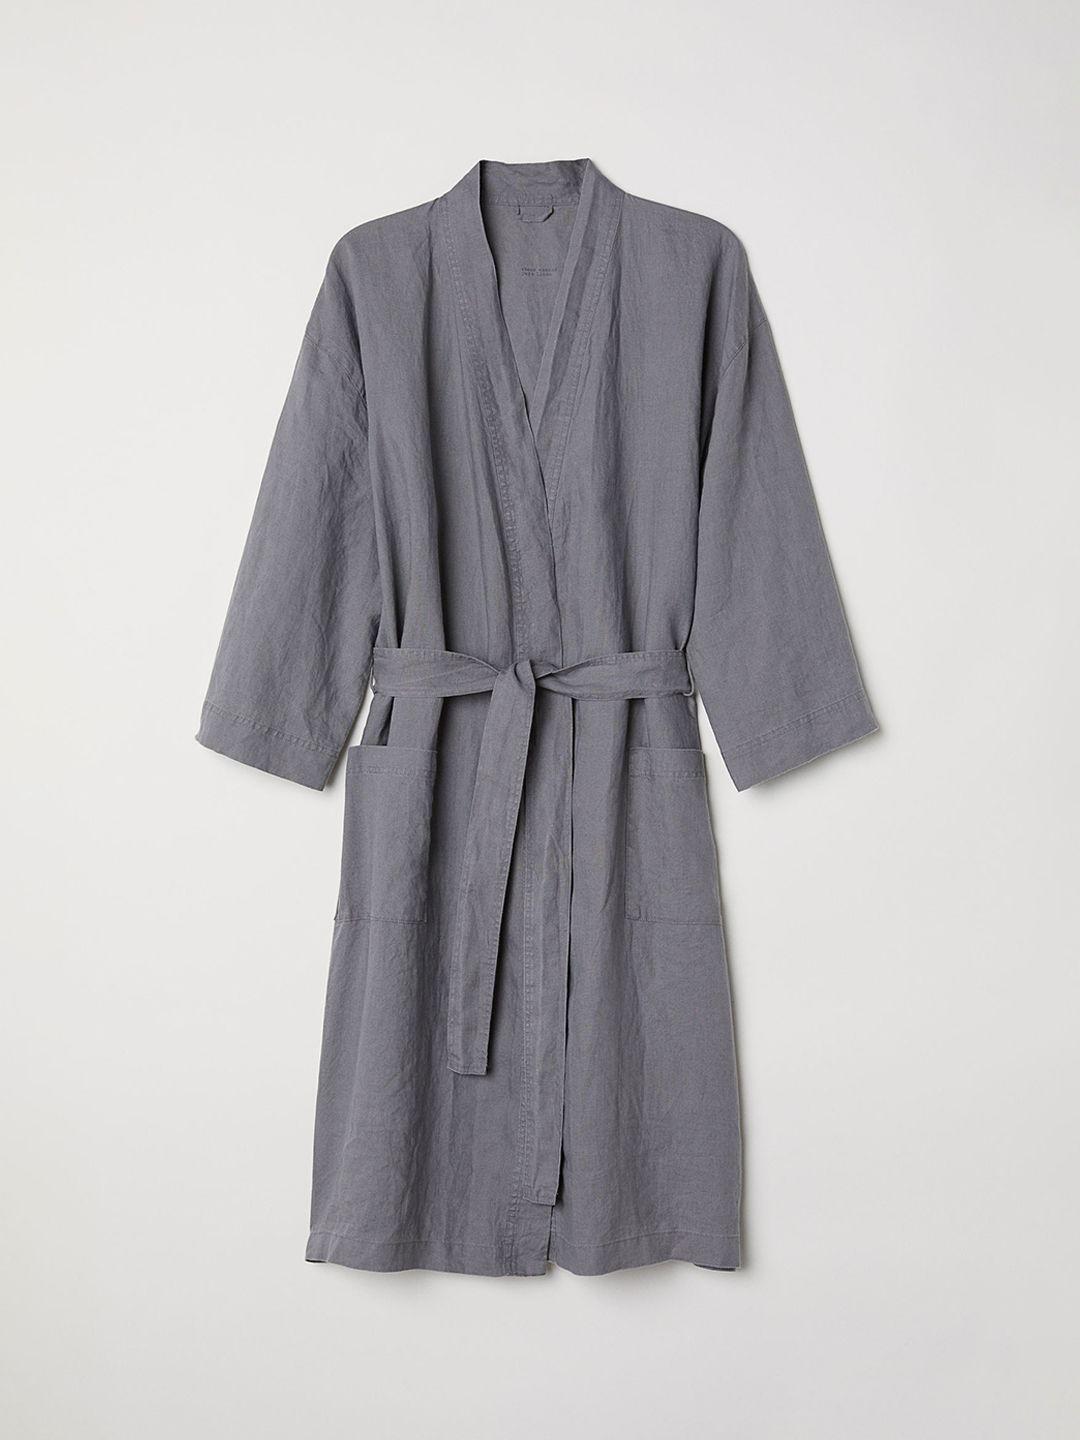 h&m unisex grey washed linen dressing gown